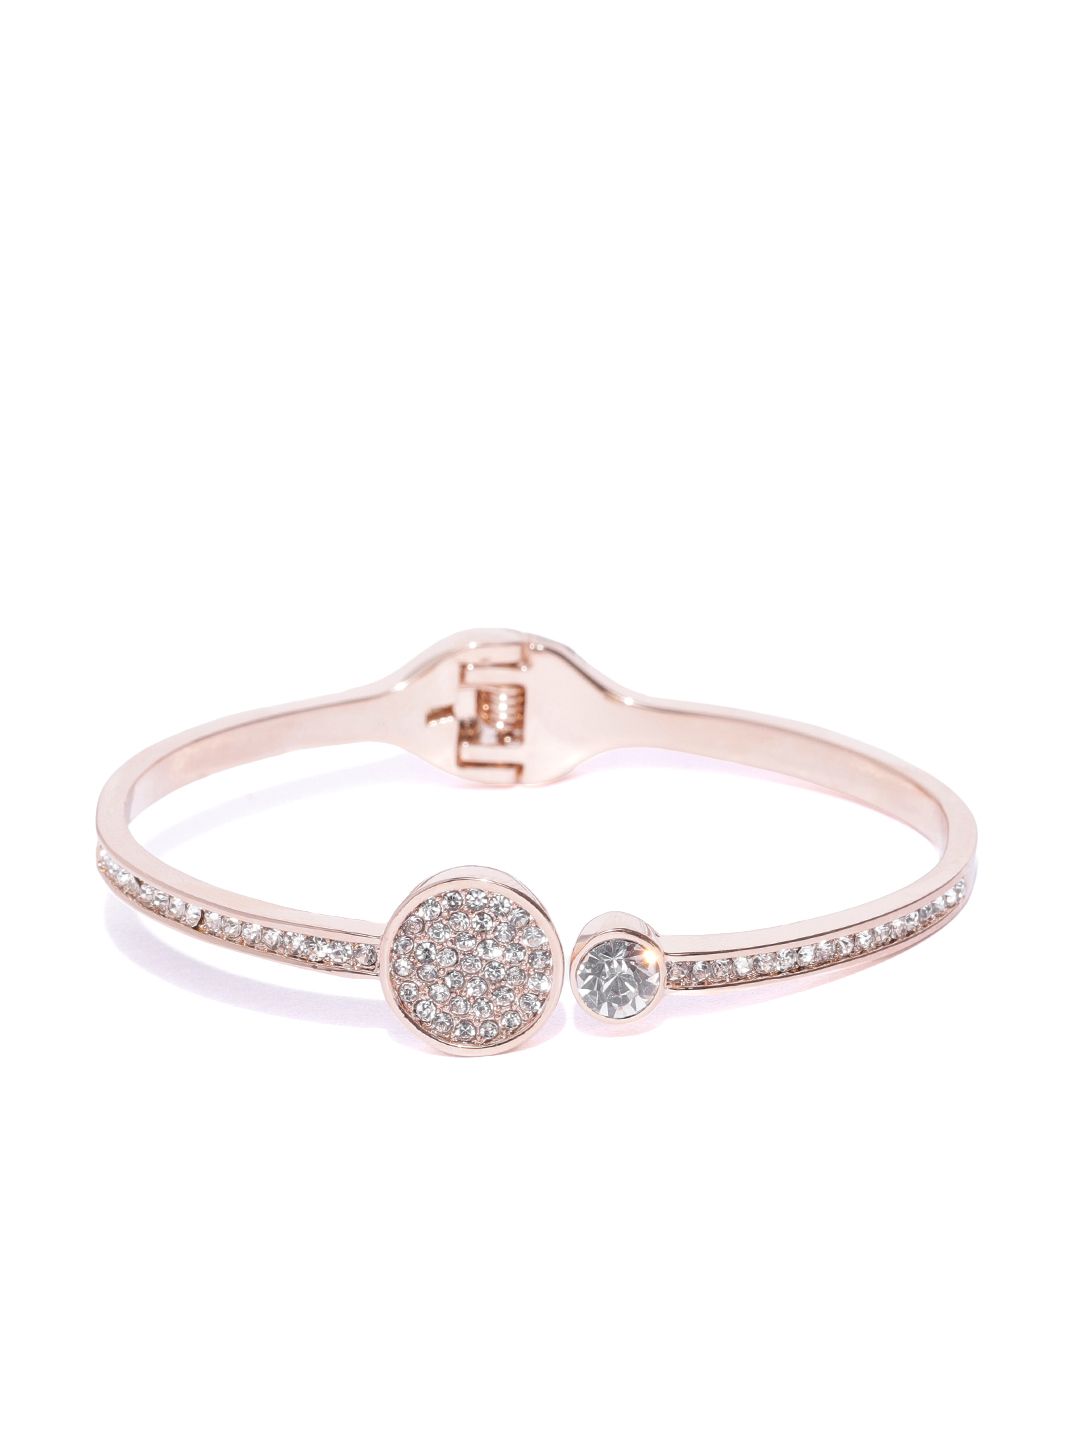 Jewels Galaxy Rose Gold-Plated Handcrafted Cuff Bracelet Price in India